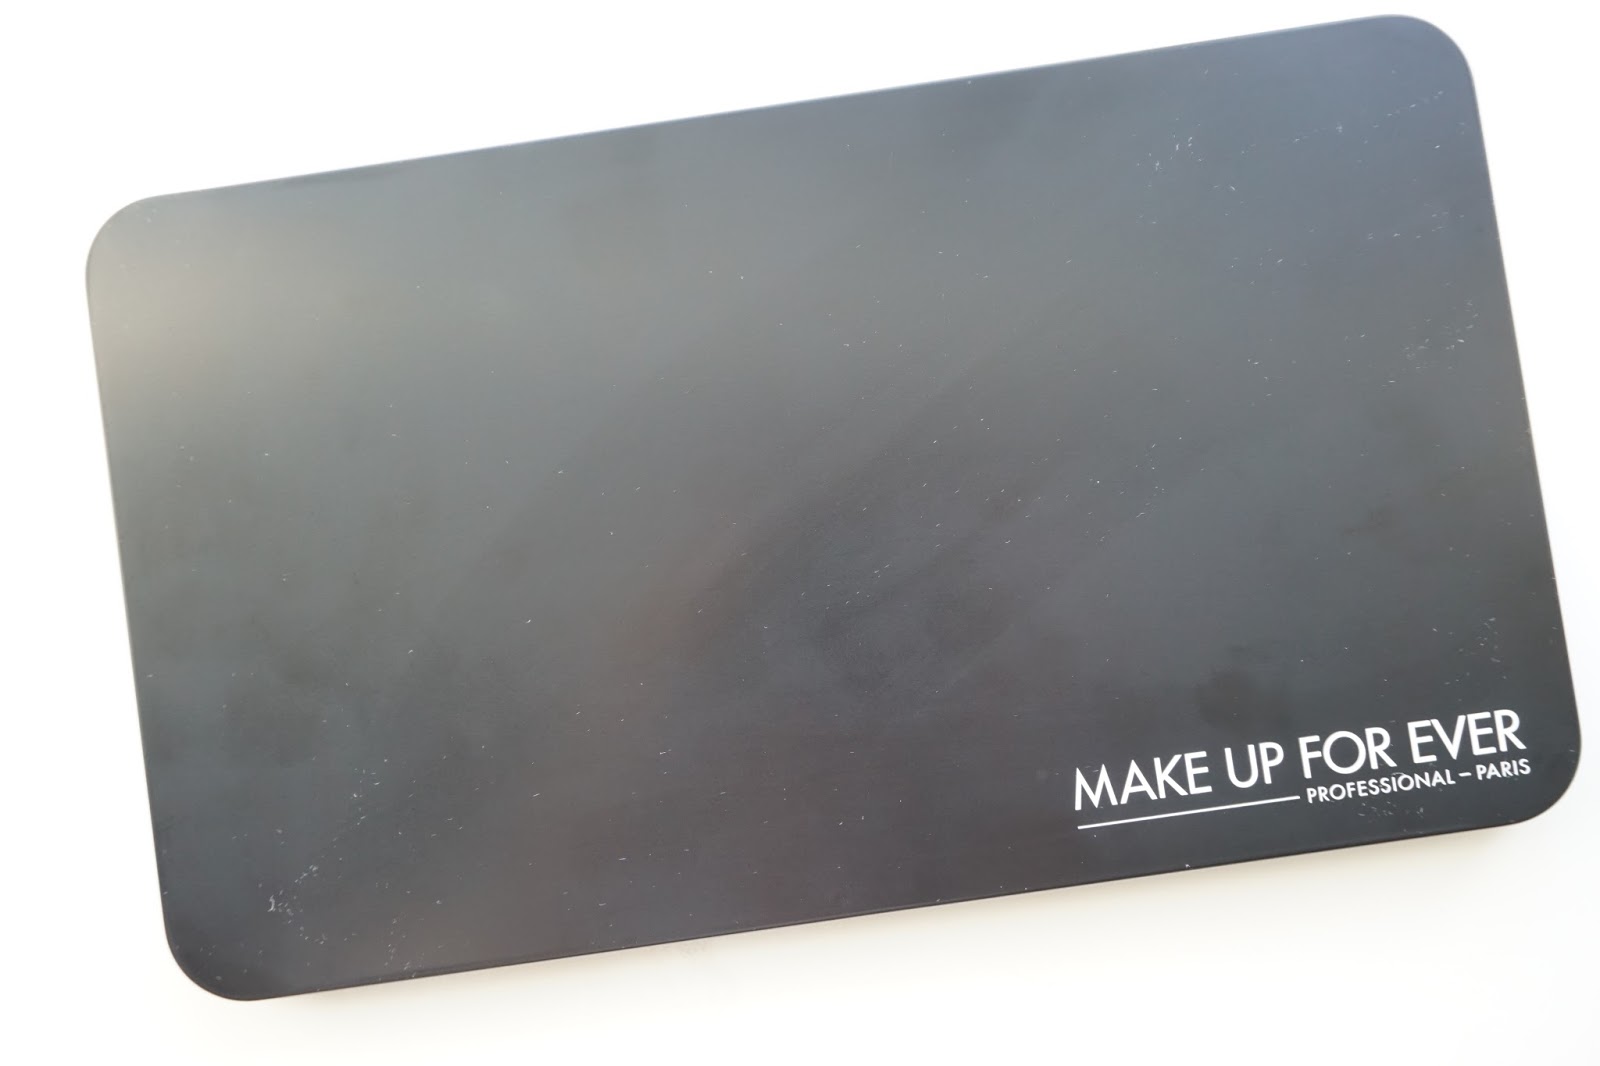 SEPHORA - Build your own Makeup Forever palette from